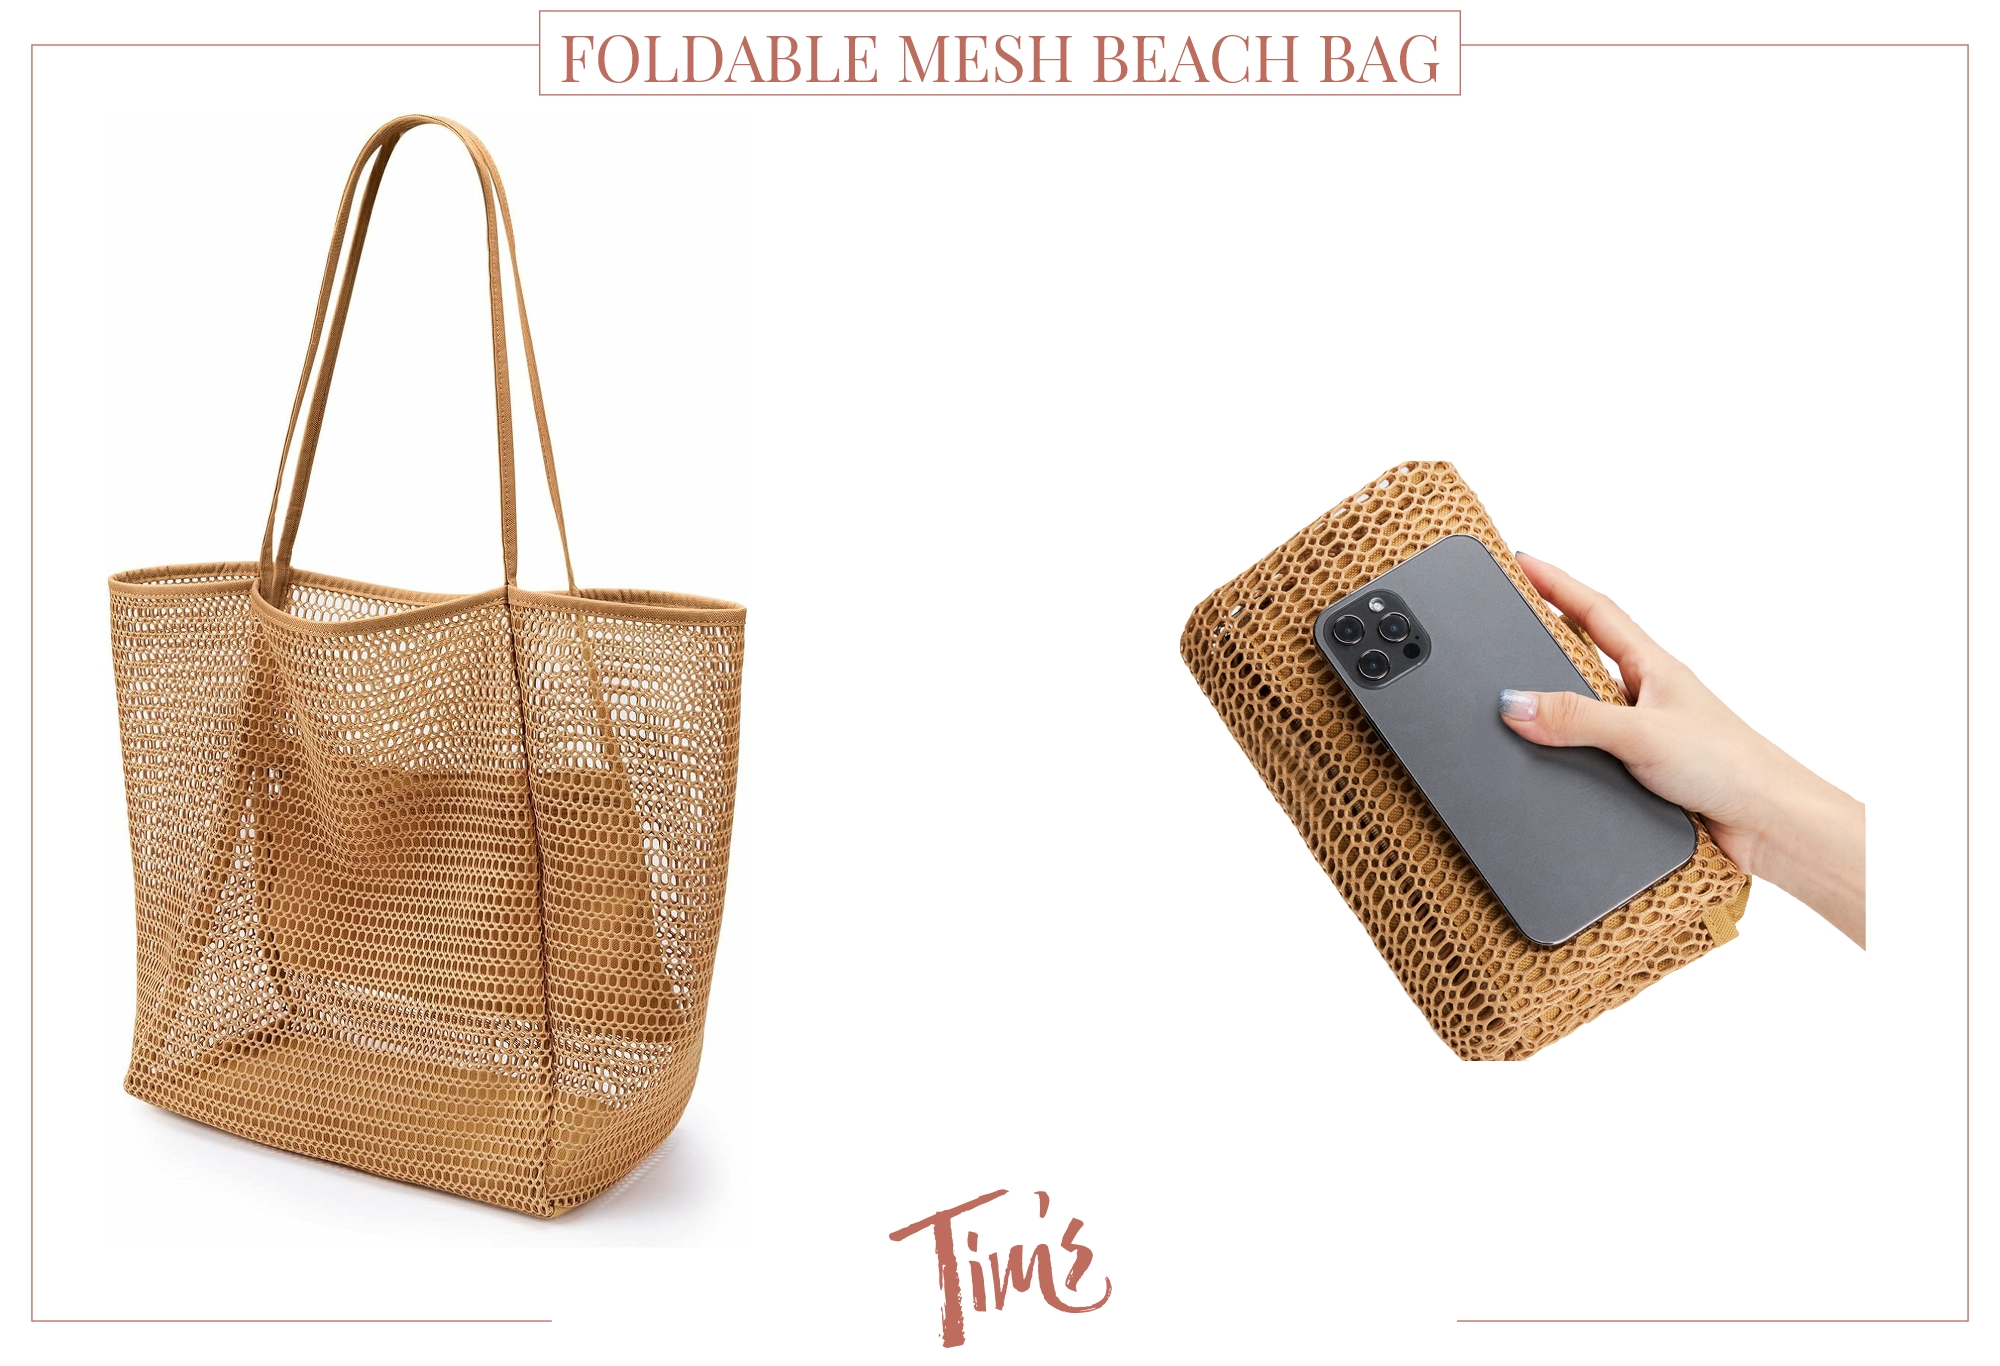 Cancun carrry on must have goldable mesh beach bag